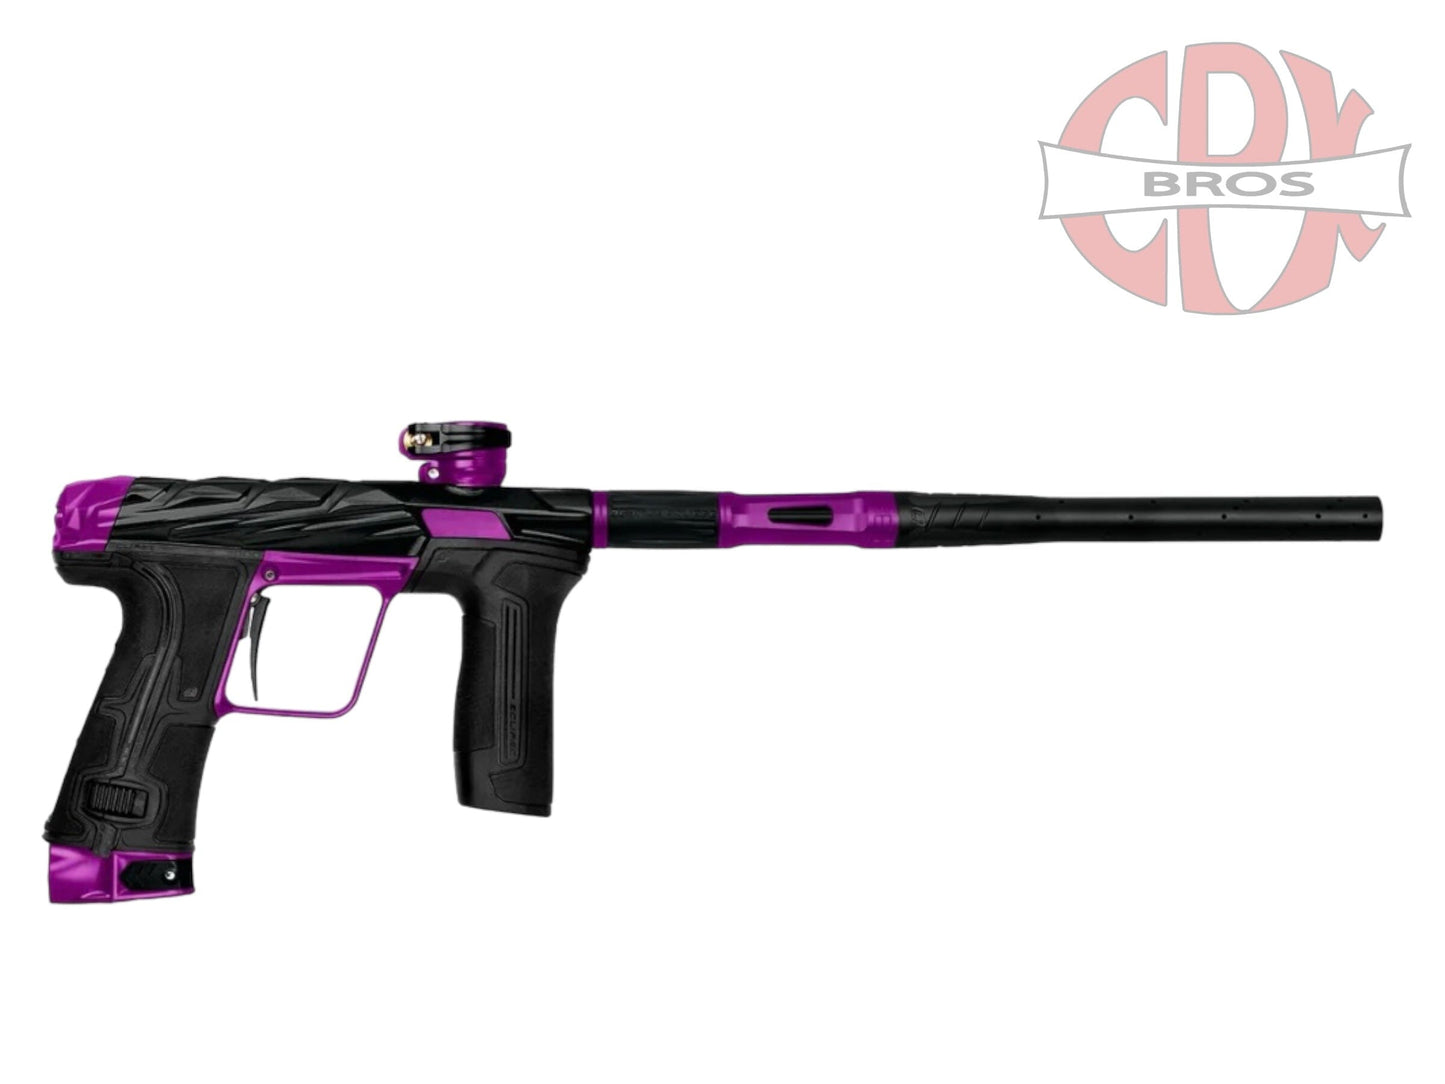 Used NEW PLANET ECLIPSE CS3 - INFAMOUS EDITION BLACK/PURPLE Paintball Gun from CPXBrosPaintball Buy/Sell/Trade Paintball Markers, New Paintball Guns, Paintball Hoppers, Paintball Masks, and Hormesis Headbands